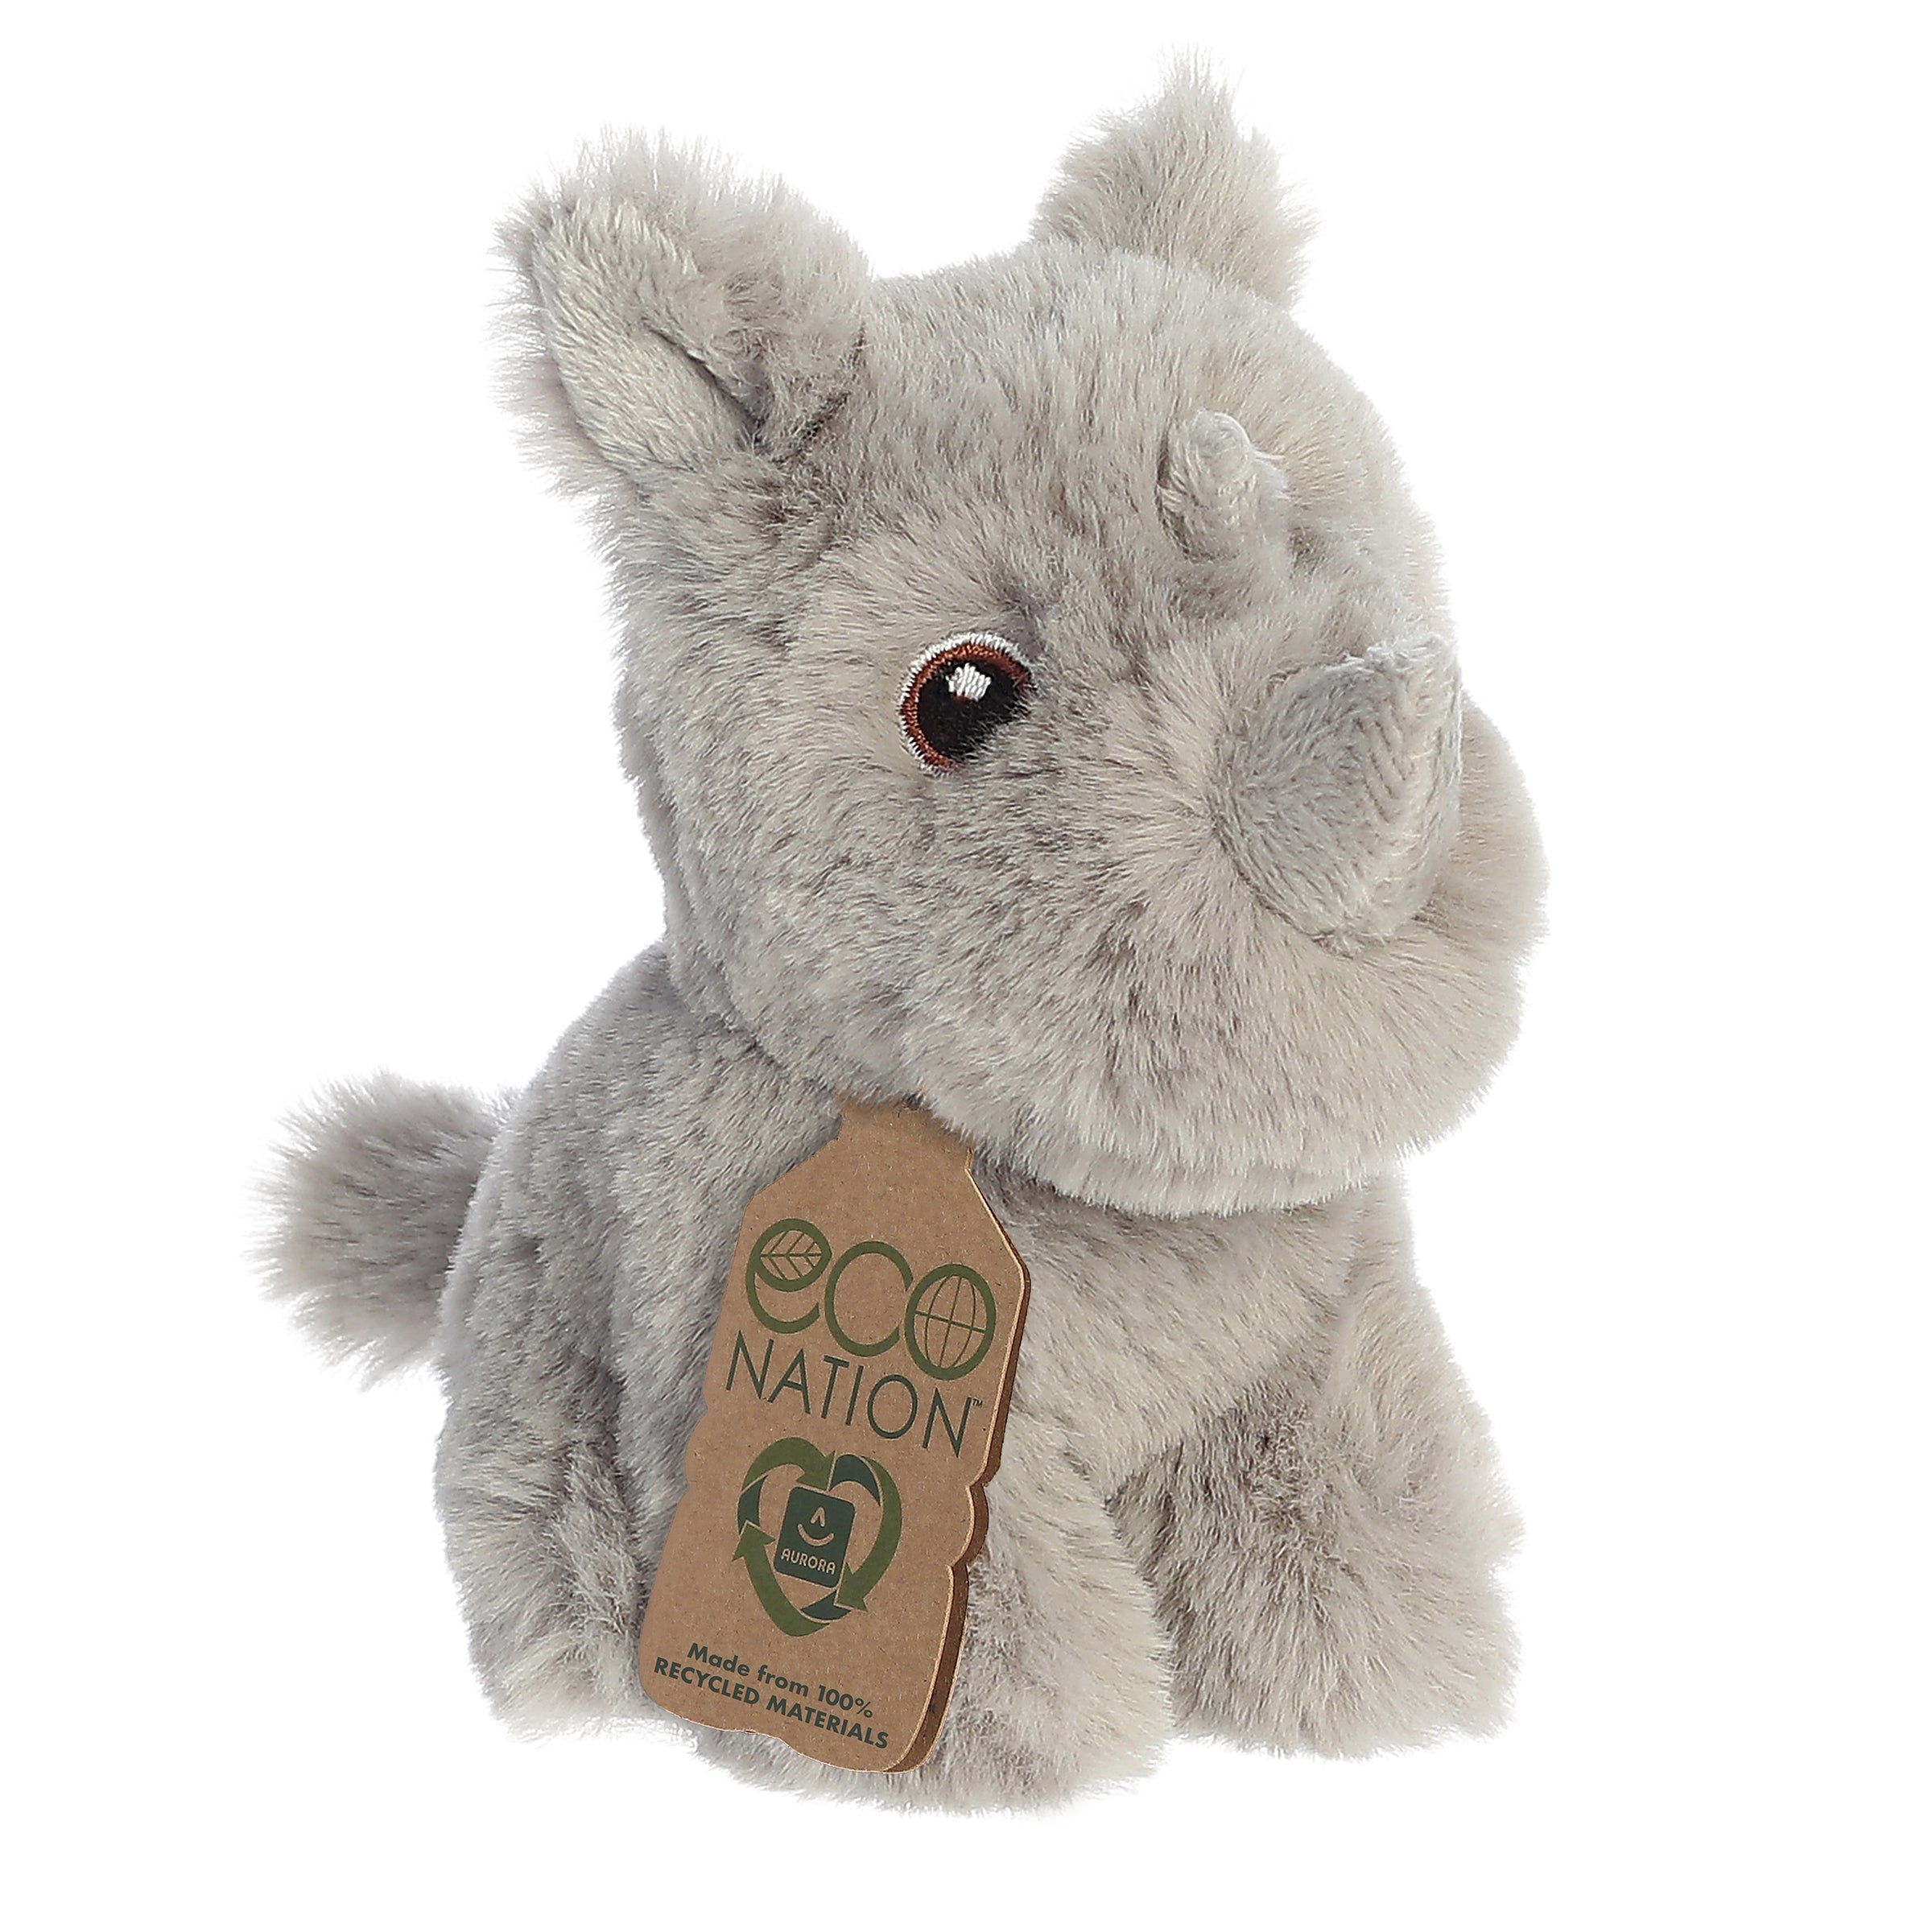 A rhinoceros plush resembling its safari counterpart, with a rich grey coat, gentle embroidered eyes, and an eco-nation tag.